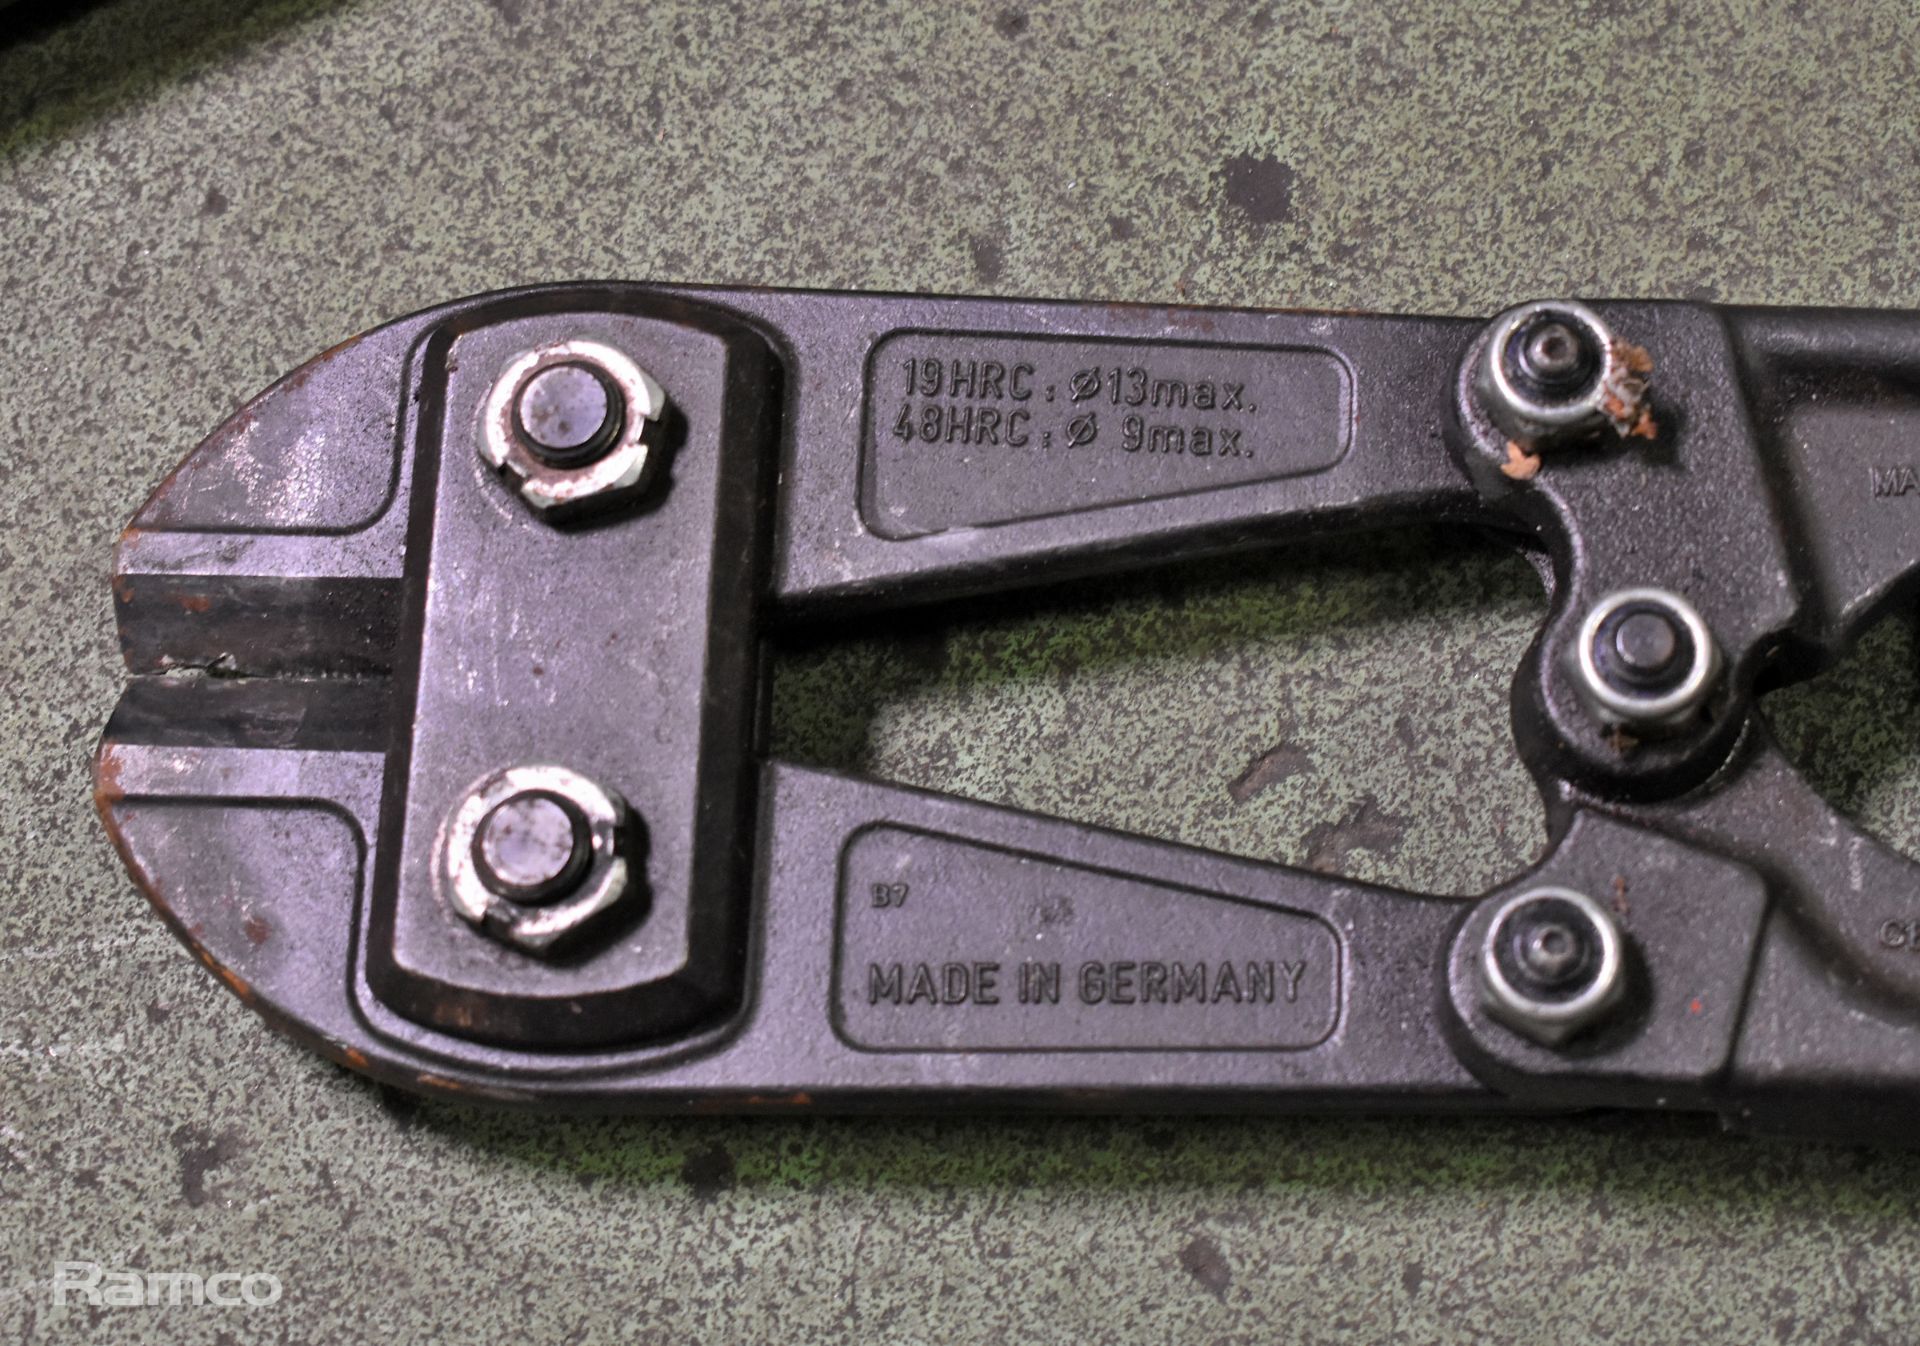 2x VBW No.430 36 inch (910mm) bolt cutters - Image 3 of 3